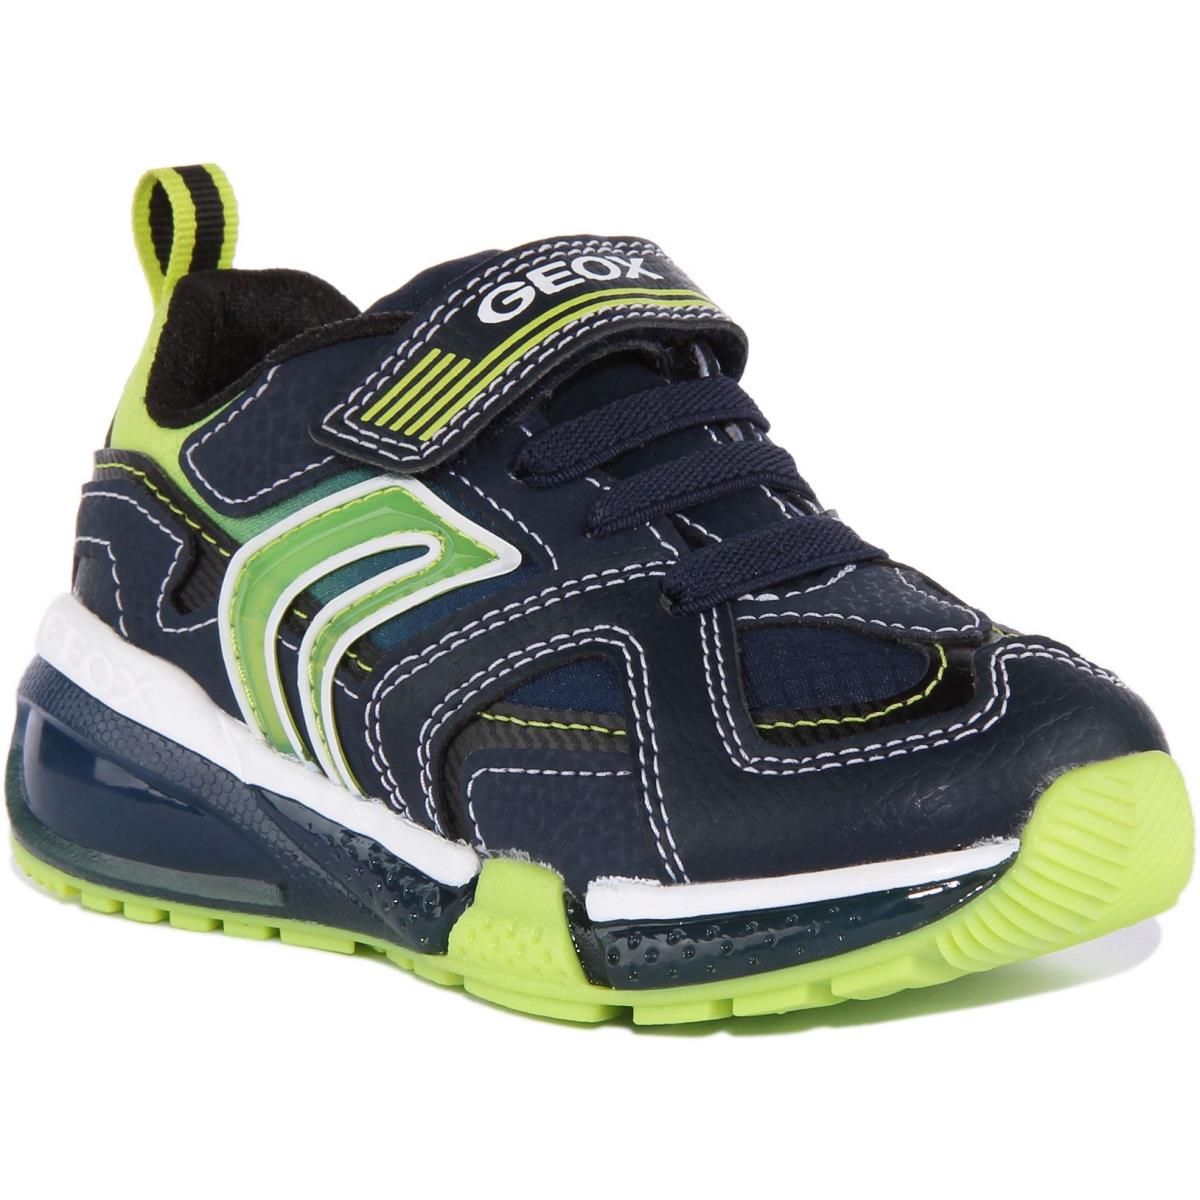 Geox J Bayonce Boys Single Strap Lights Up Sneakers In Navy Size US 8 - 4 NAVY